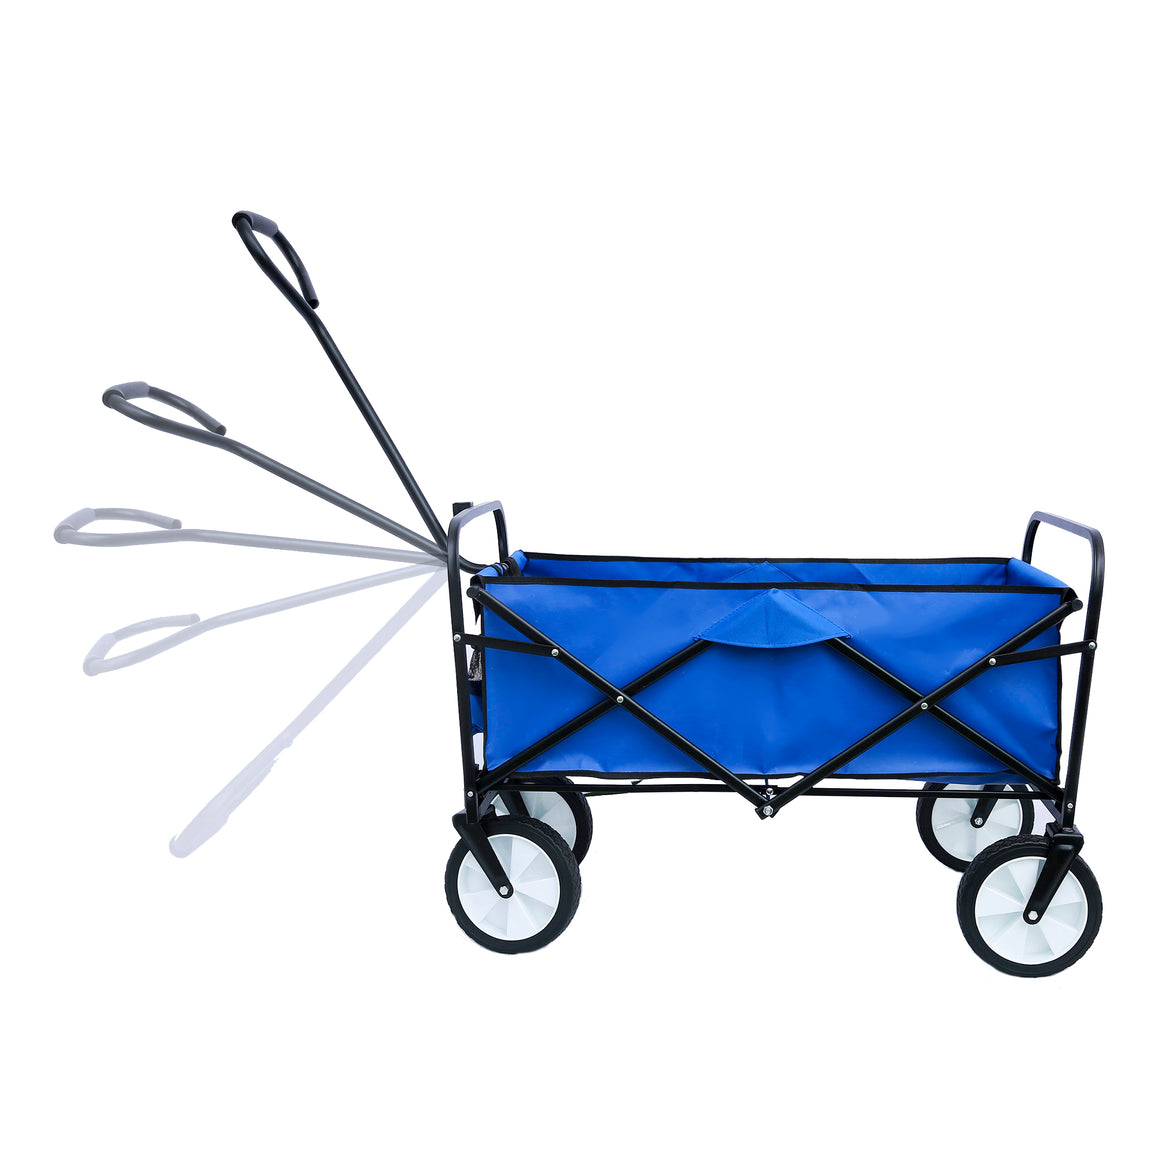 Folding Wagon, Beach Carts with Big Wheels, Heavy Duty Steel Frame Shopping Cart, 600D Oxford Cloth Collapsible Utility Wagon with 2 Mesh Cup Holders for Garden Shopping Picnic Beach, Blue